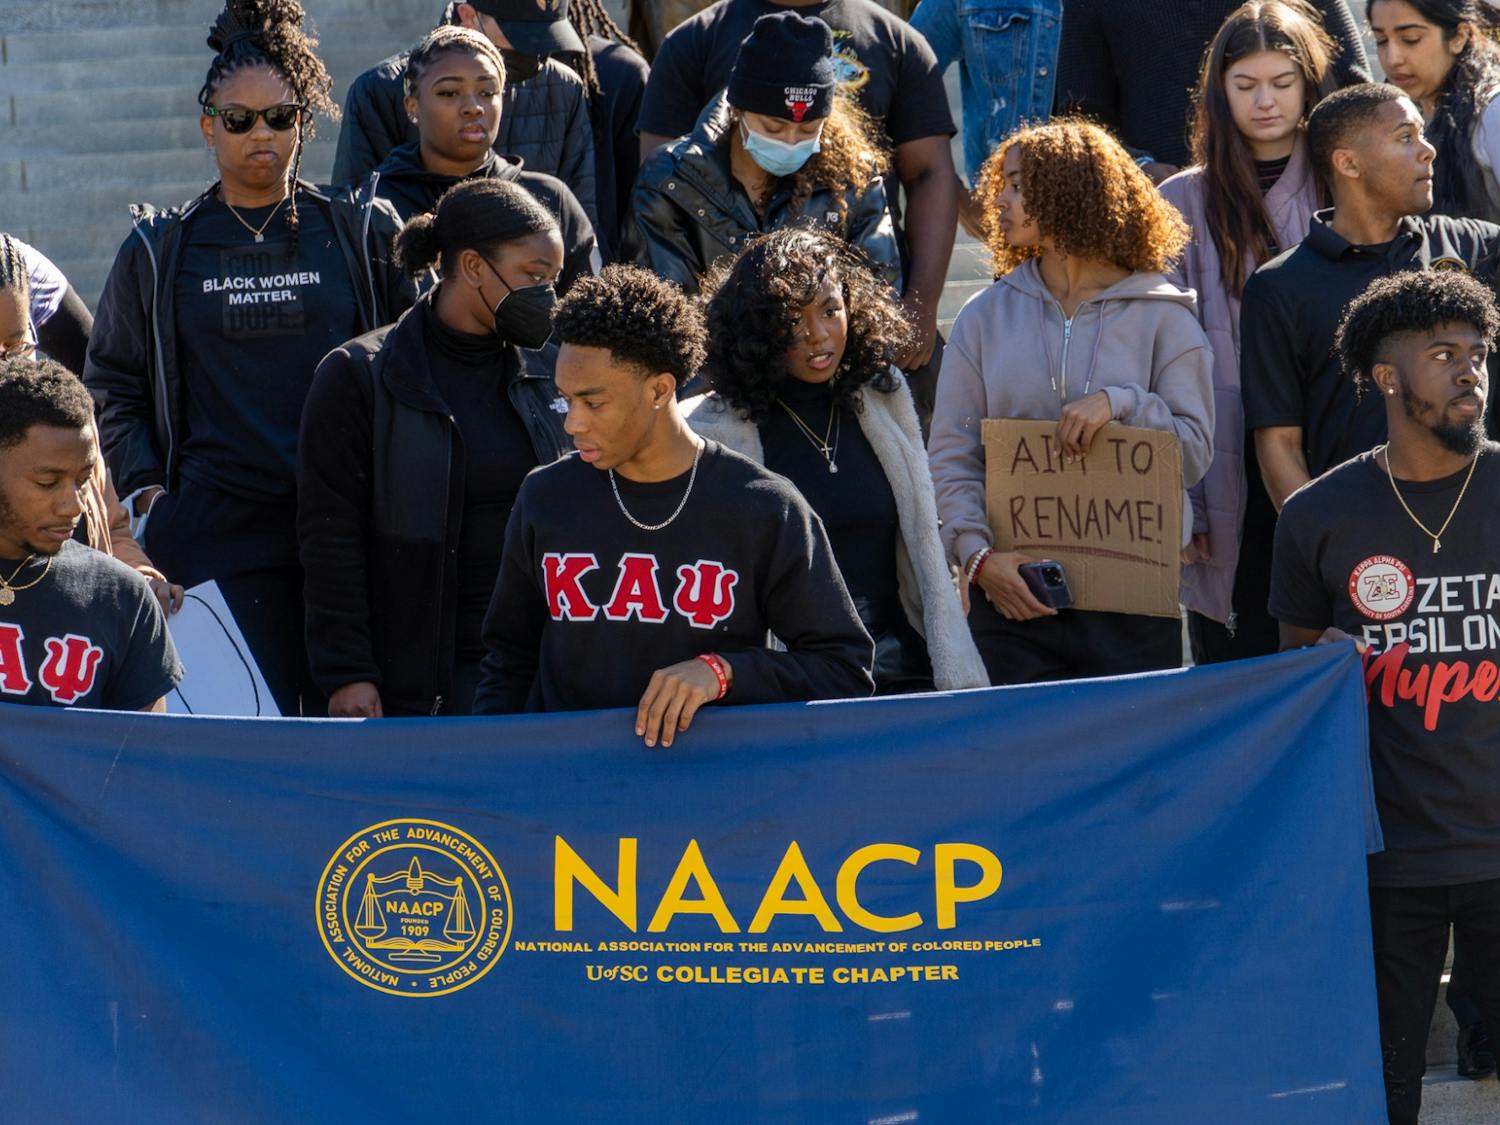 The protesters gather on the steps of the statehouse to complete their protest on Feb 5, 2022. The USC NAACP chapter sponsored this event calling for the repeal of the S.C. Heritage Act and the removal of segregation and civil war era SC figures from university building names and state sponsored structures.